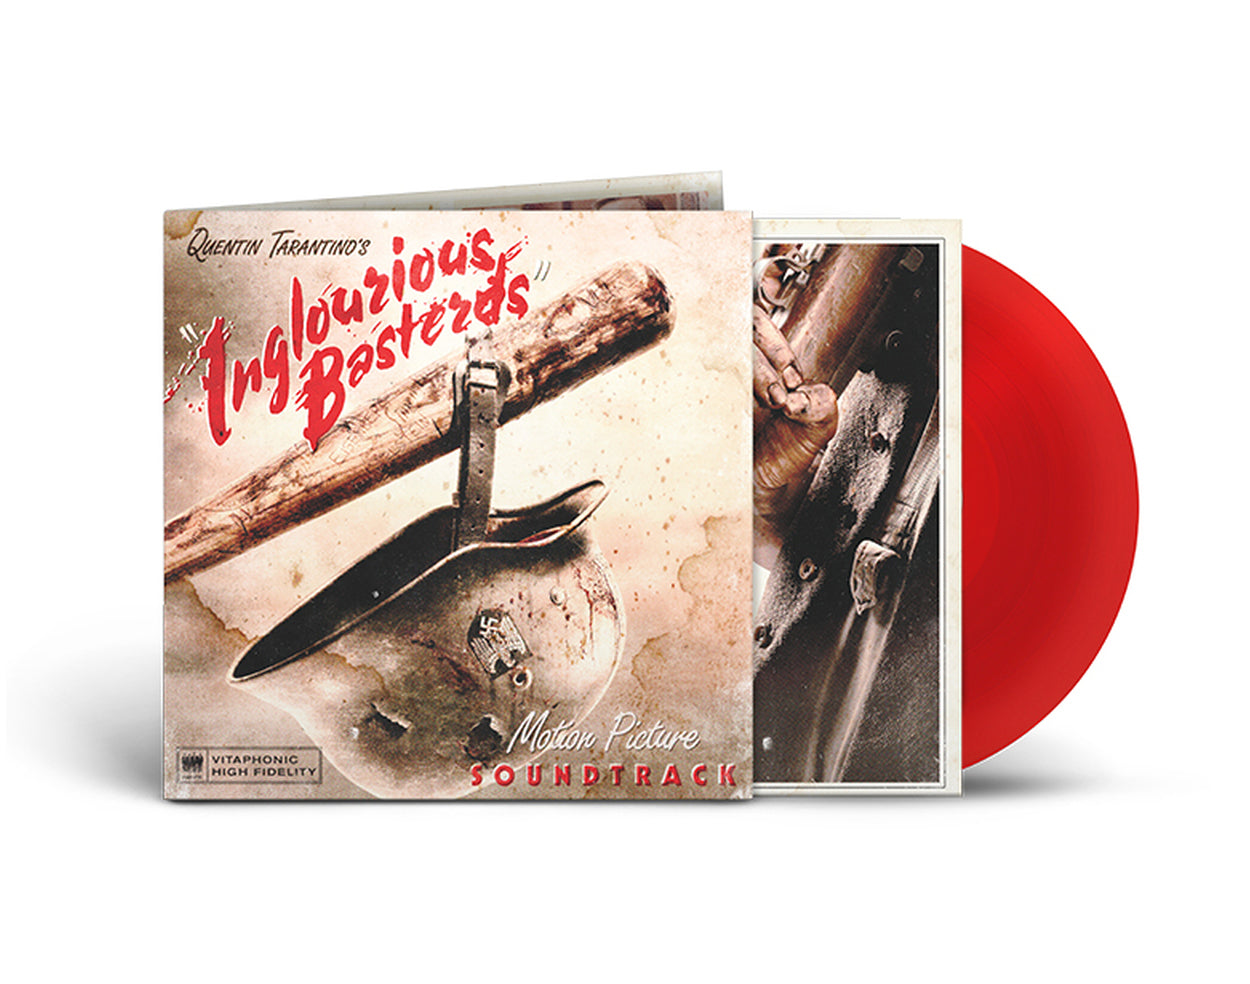 Various – Quentin Tarantino's Inglourious Basterds (Motion Picture Soundtrack) (Blood Red Translucent Vinyl, brick and mortar exclusive)